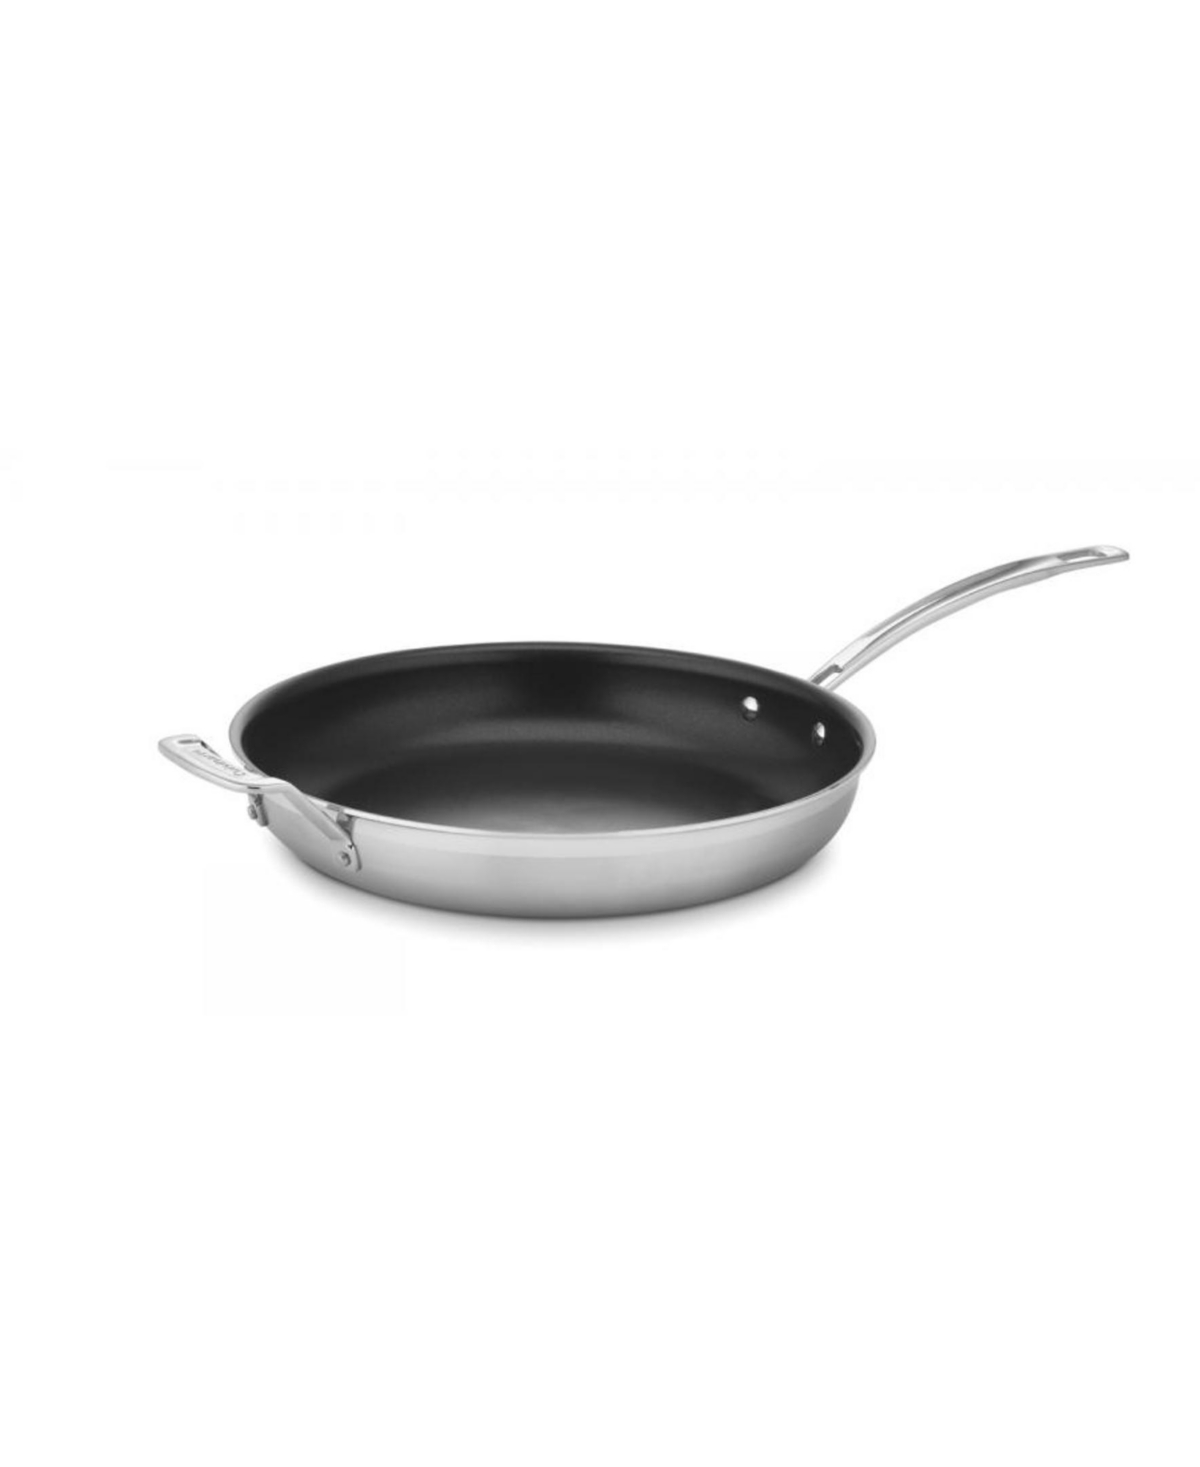 Cuisinart Multiclad Pro 12" Skillet In Stainless Steel